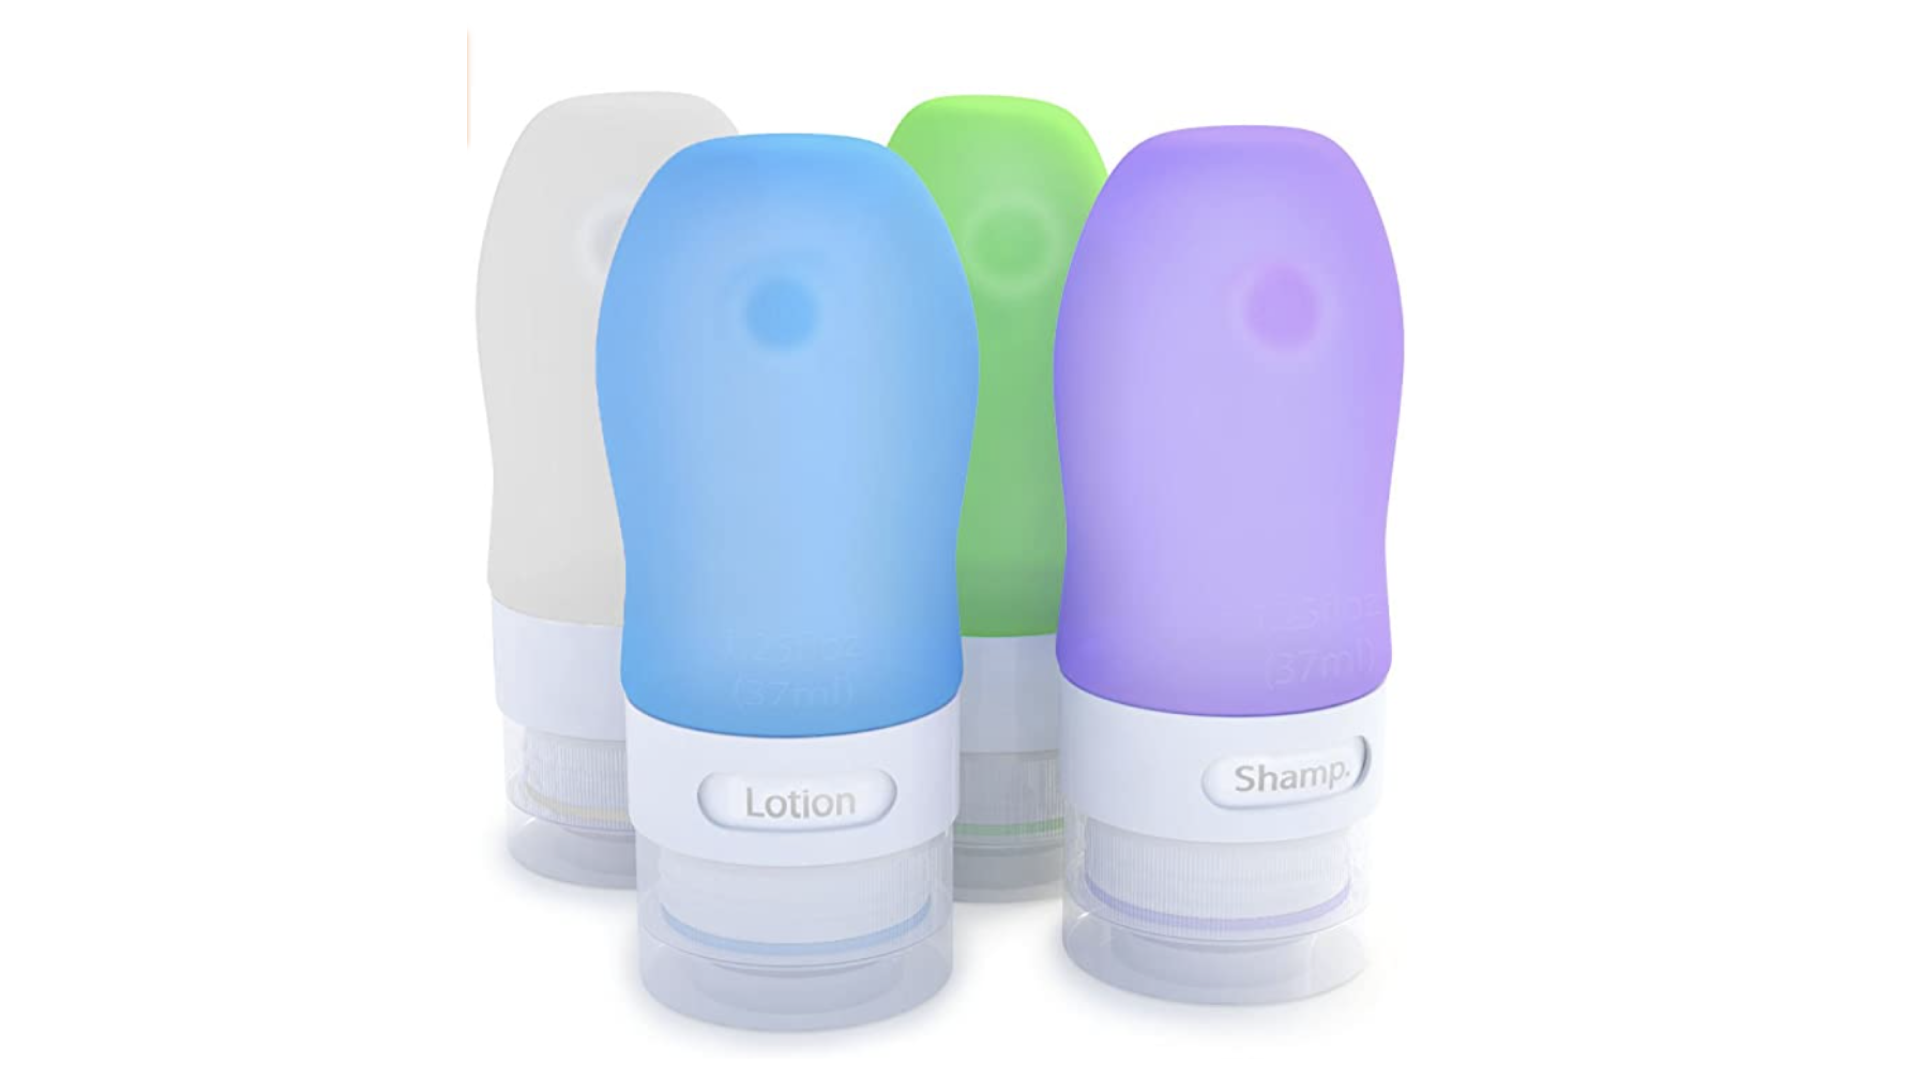 Refillable, reusable, travel-sized bottles for your toiletries